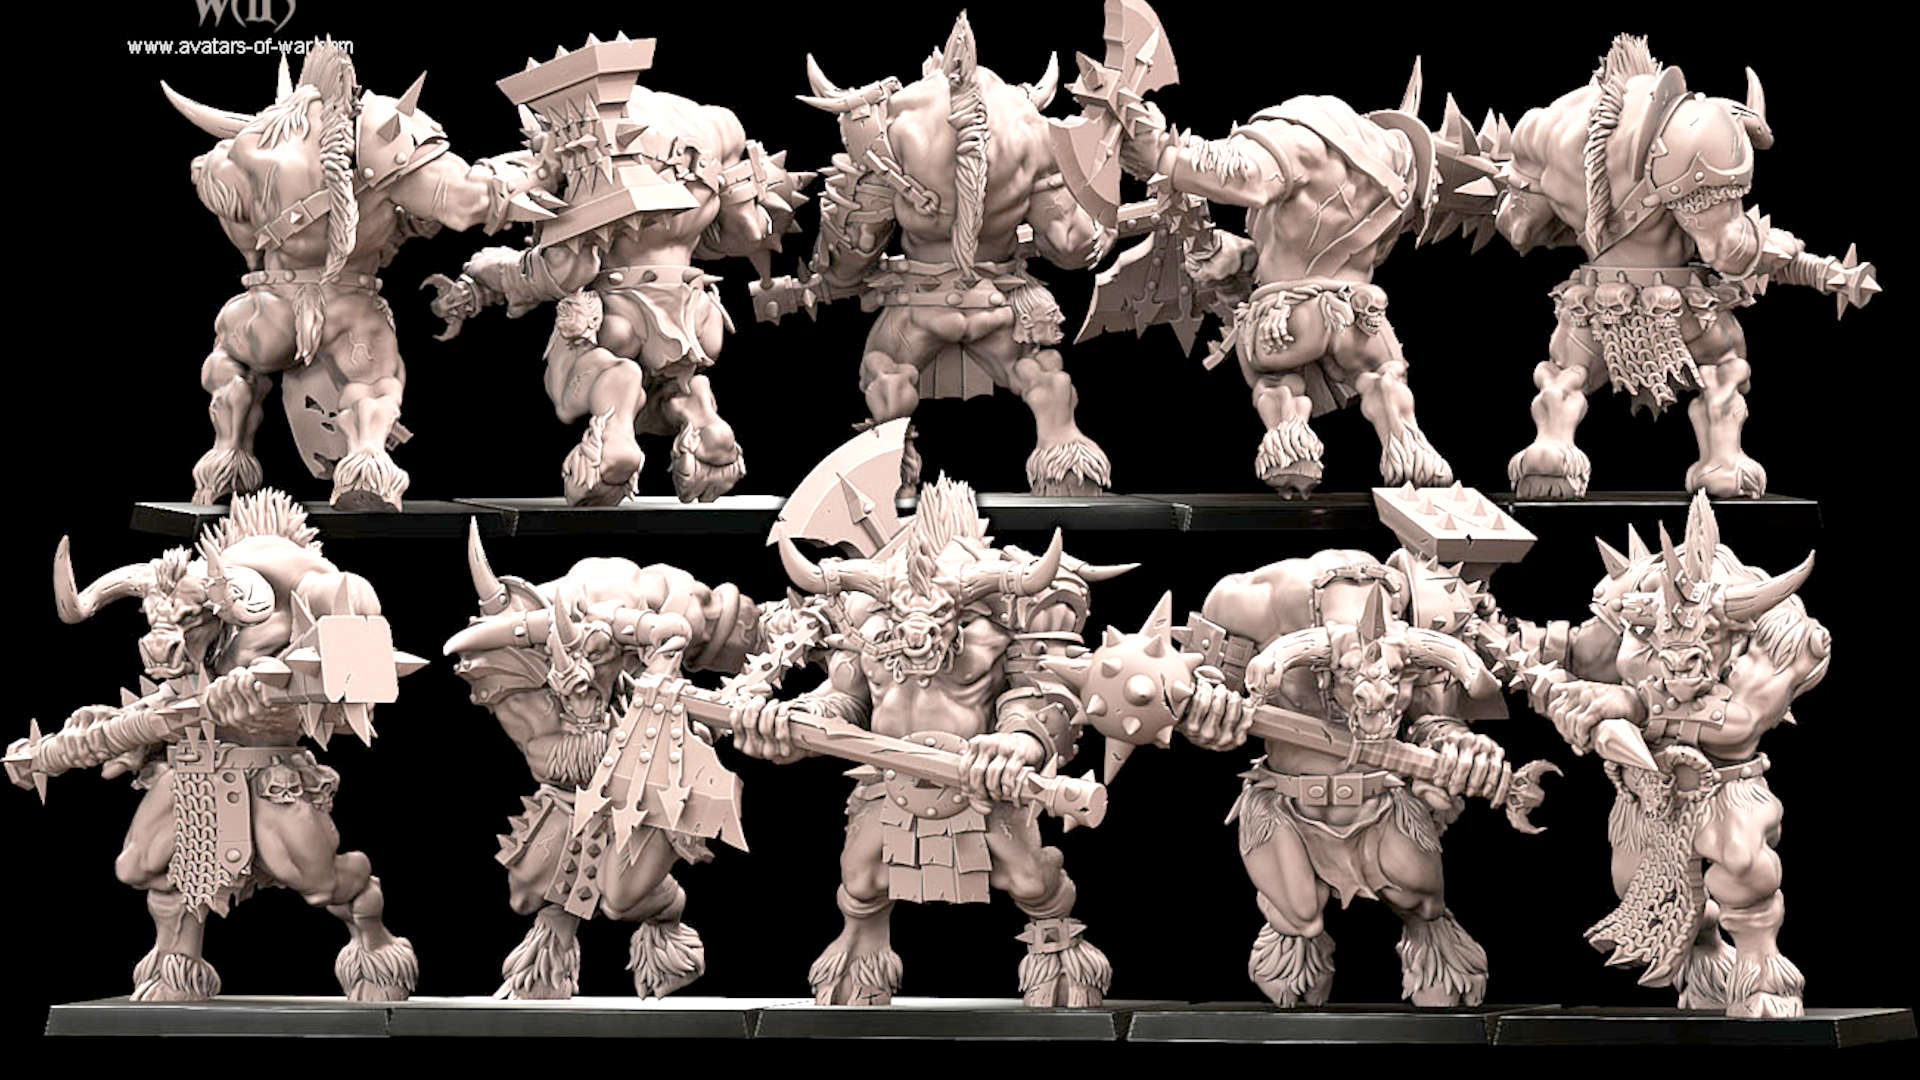 Front and back view of Avatars of War minotaurs, perfect for Warhammer fantasy - they are armed with brutal double-handed weapons